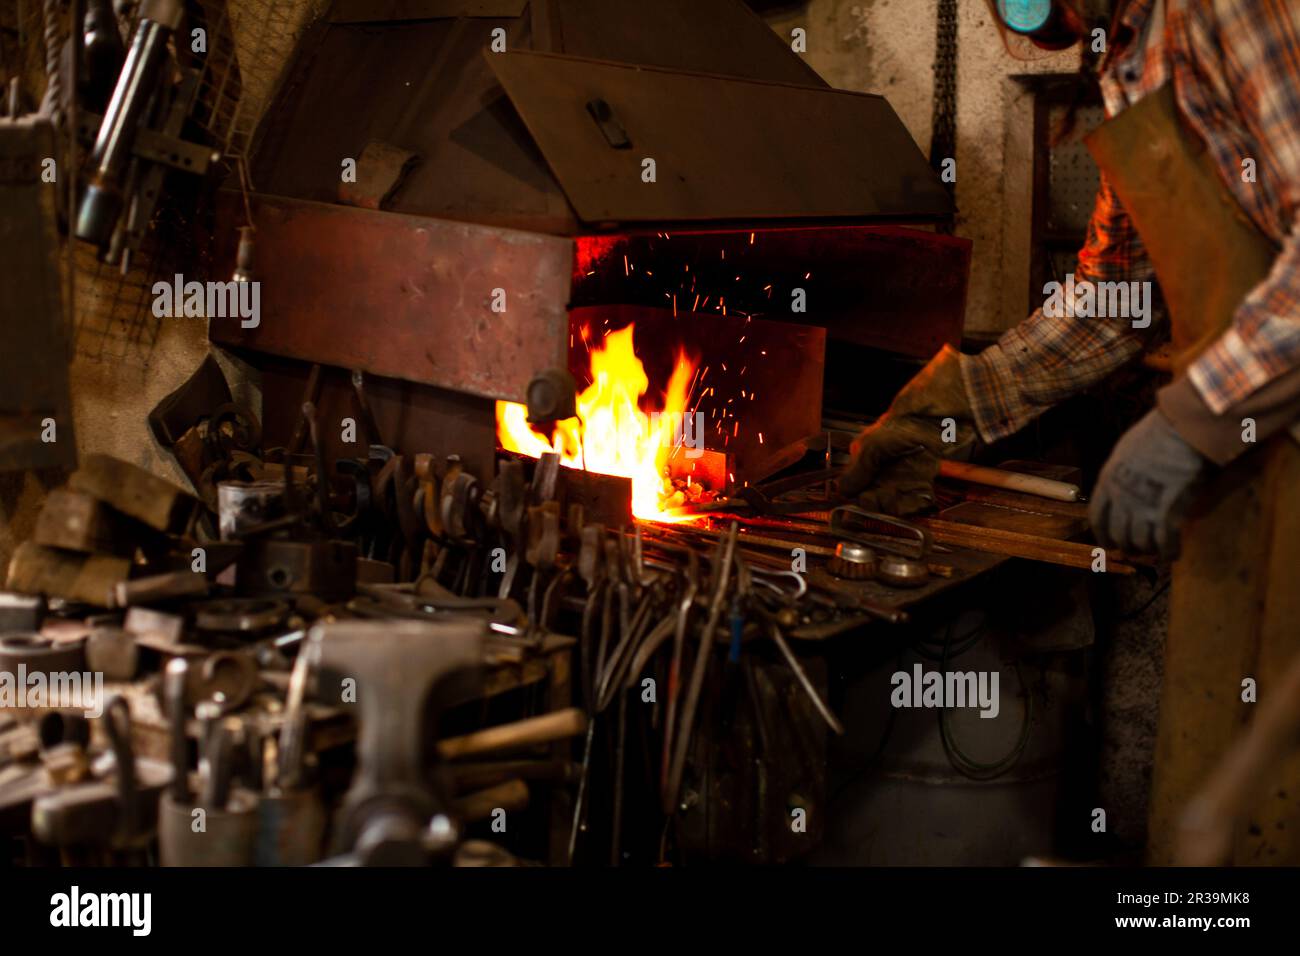 The blacksmith manually forging the molten metal on the anvil in smithy. Stock Photo